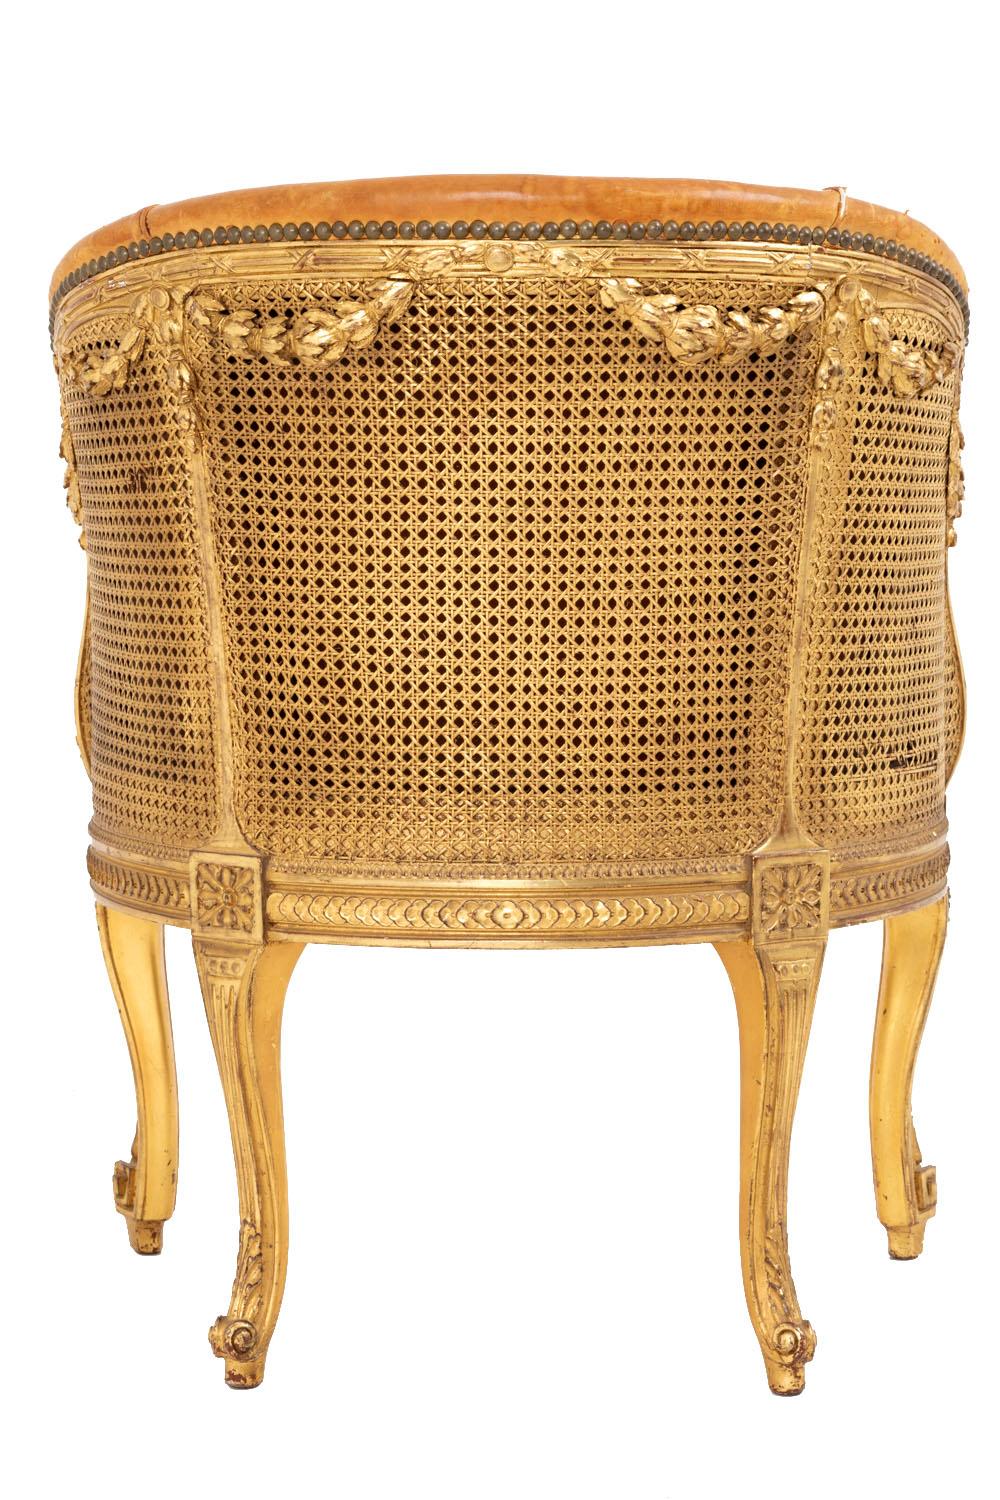 Louis XV Transition Style Bergere in Giltwood and Leather, circa 1880